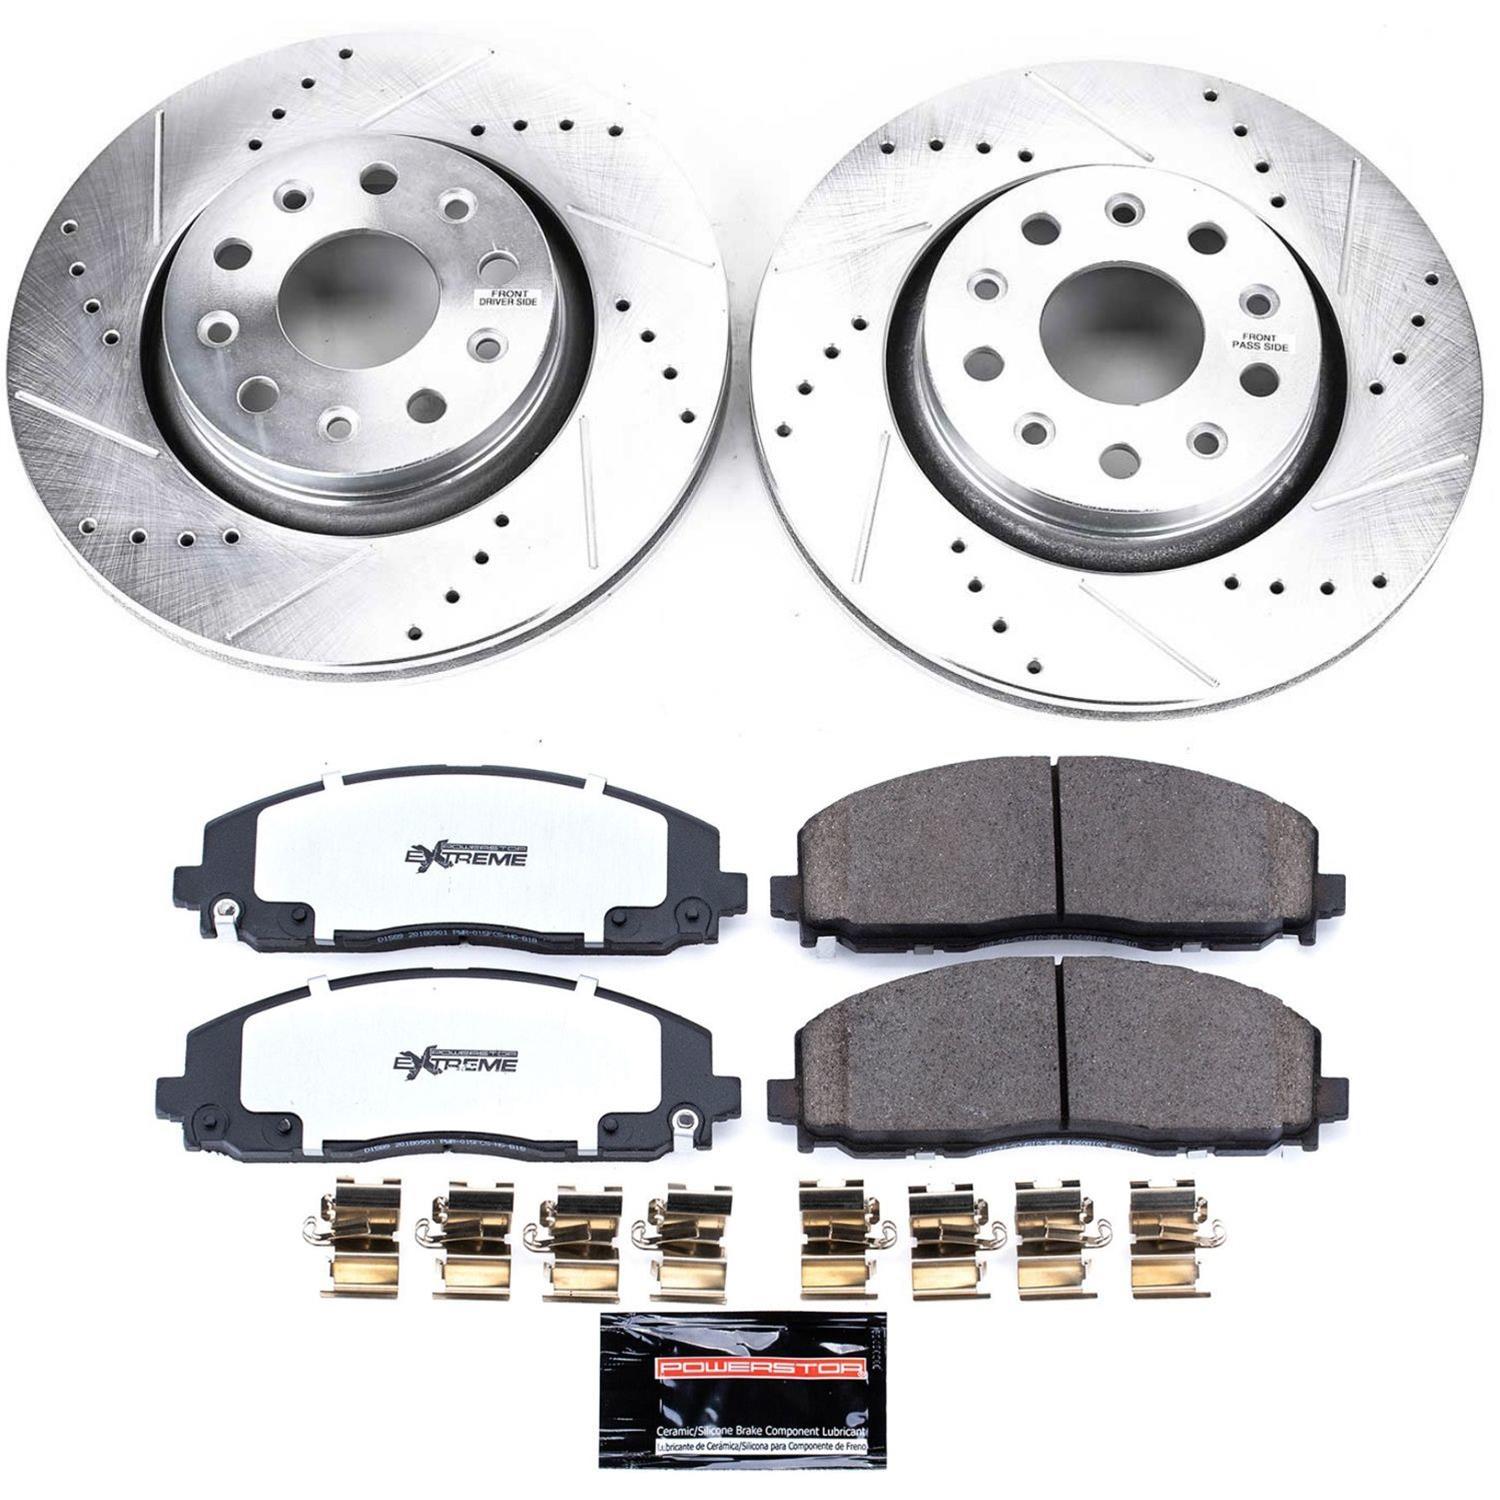 Power Stop K7940-36 Power Stop Z36 Truck and Tow Brake Upgrade Kits |  Summit Racing